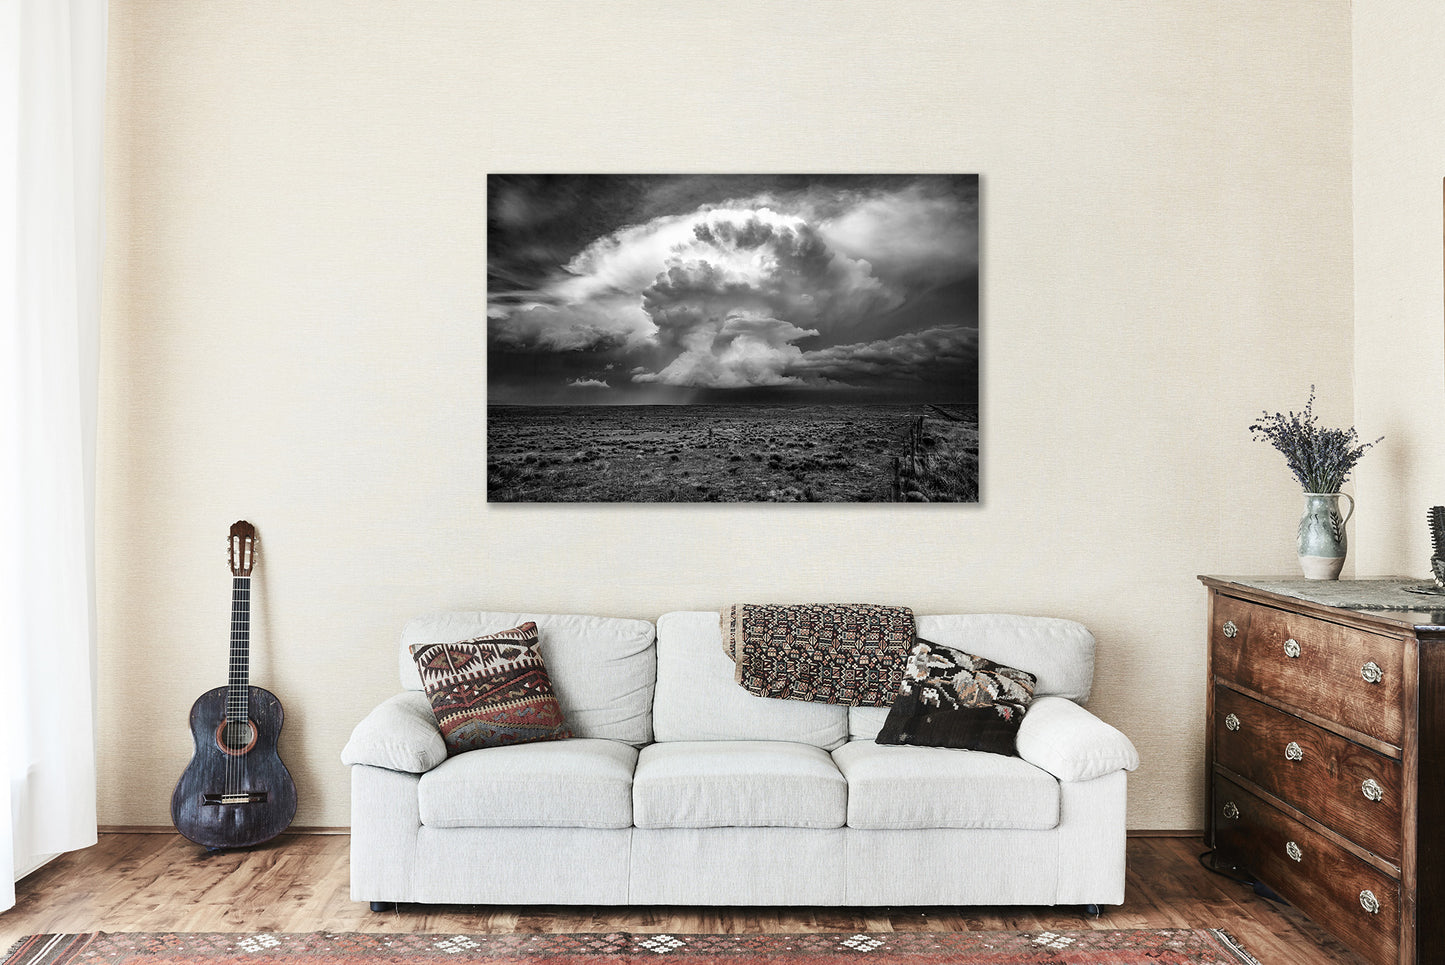 Storm Metal Print - Black and White Picture of Supercell Thunderstorm Over High Plains in Oklahoma Panhandle - Decorative Nature Wall Art